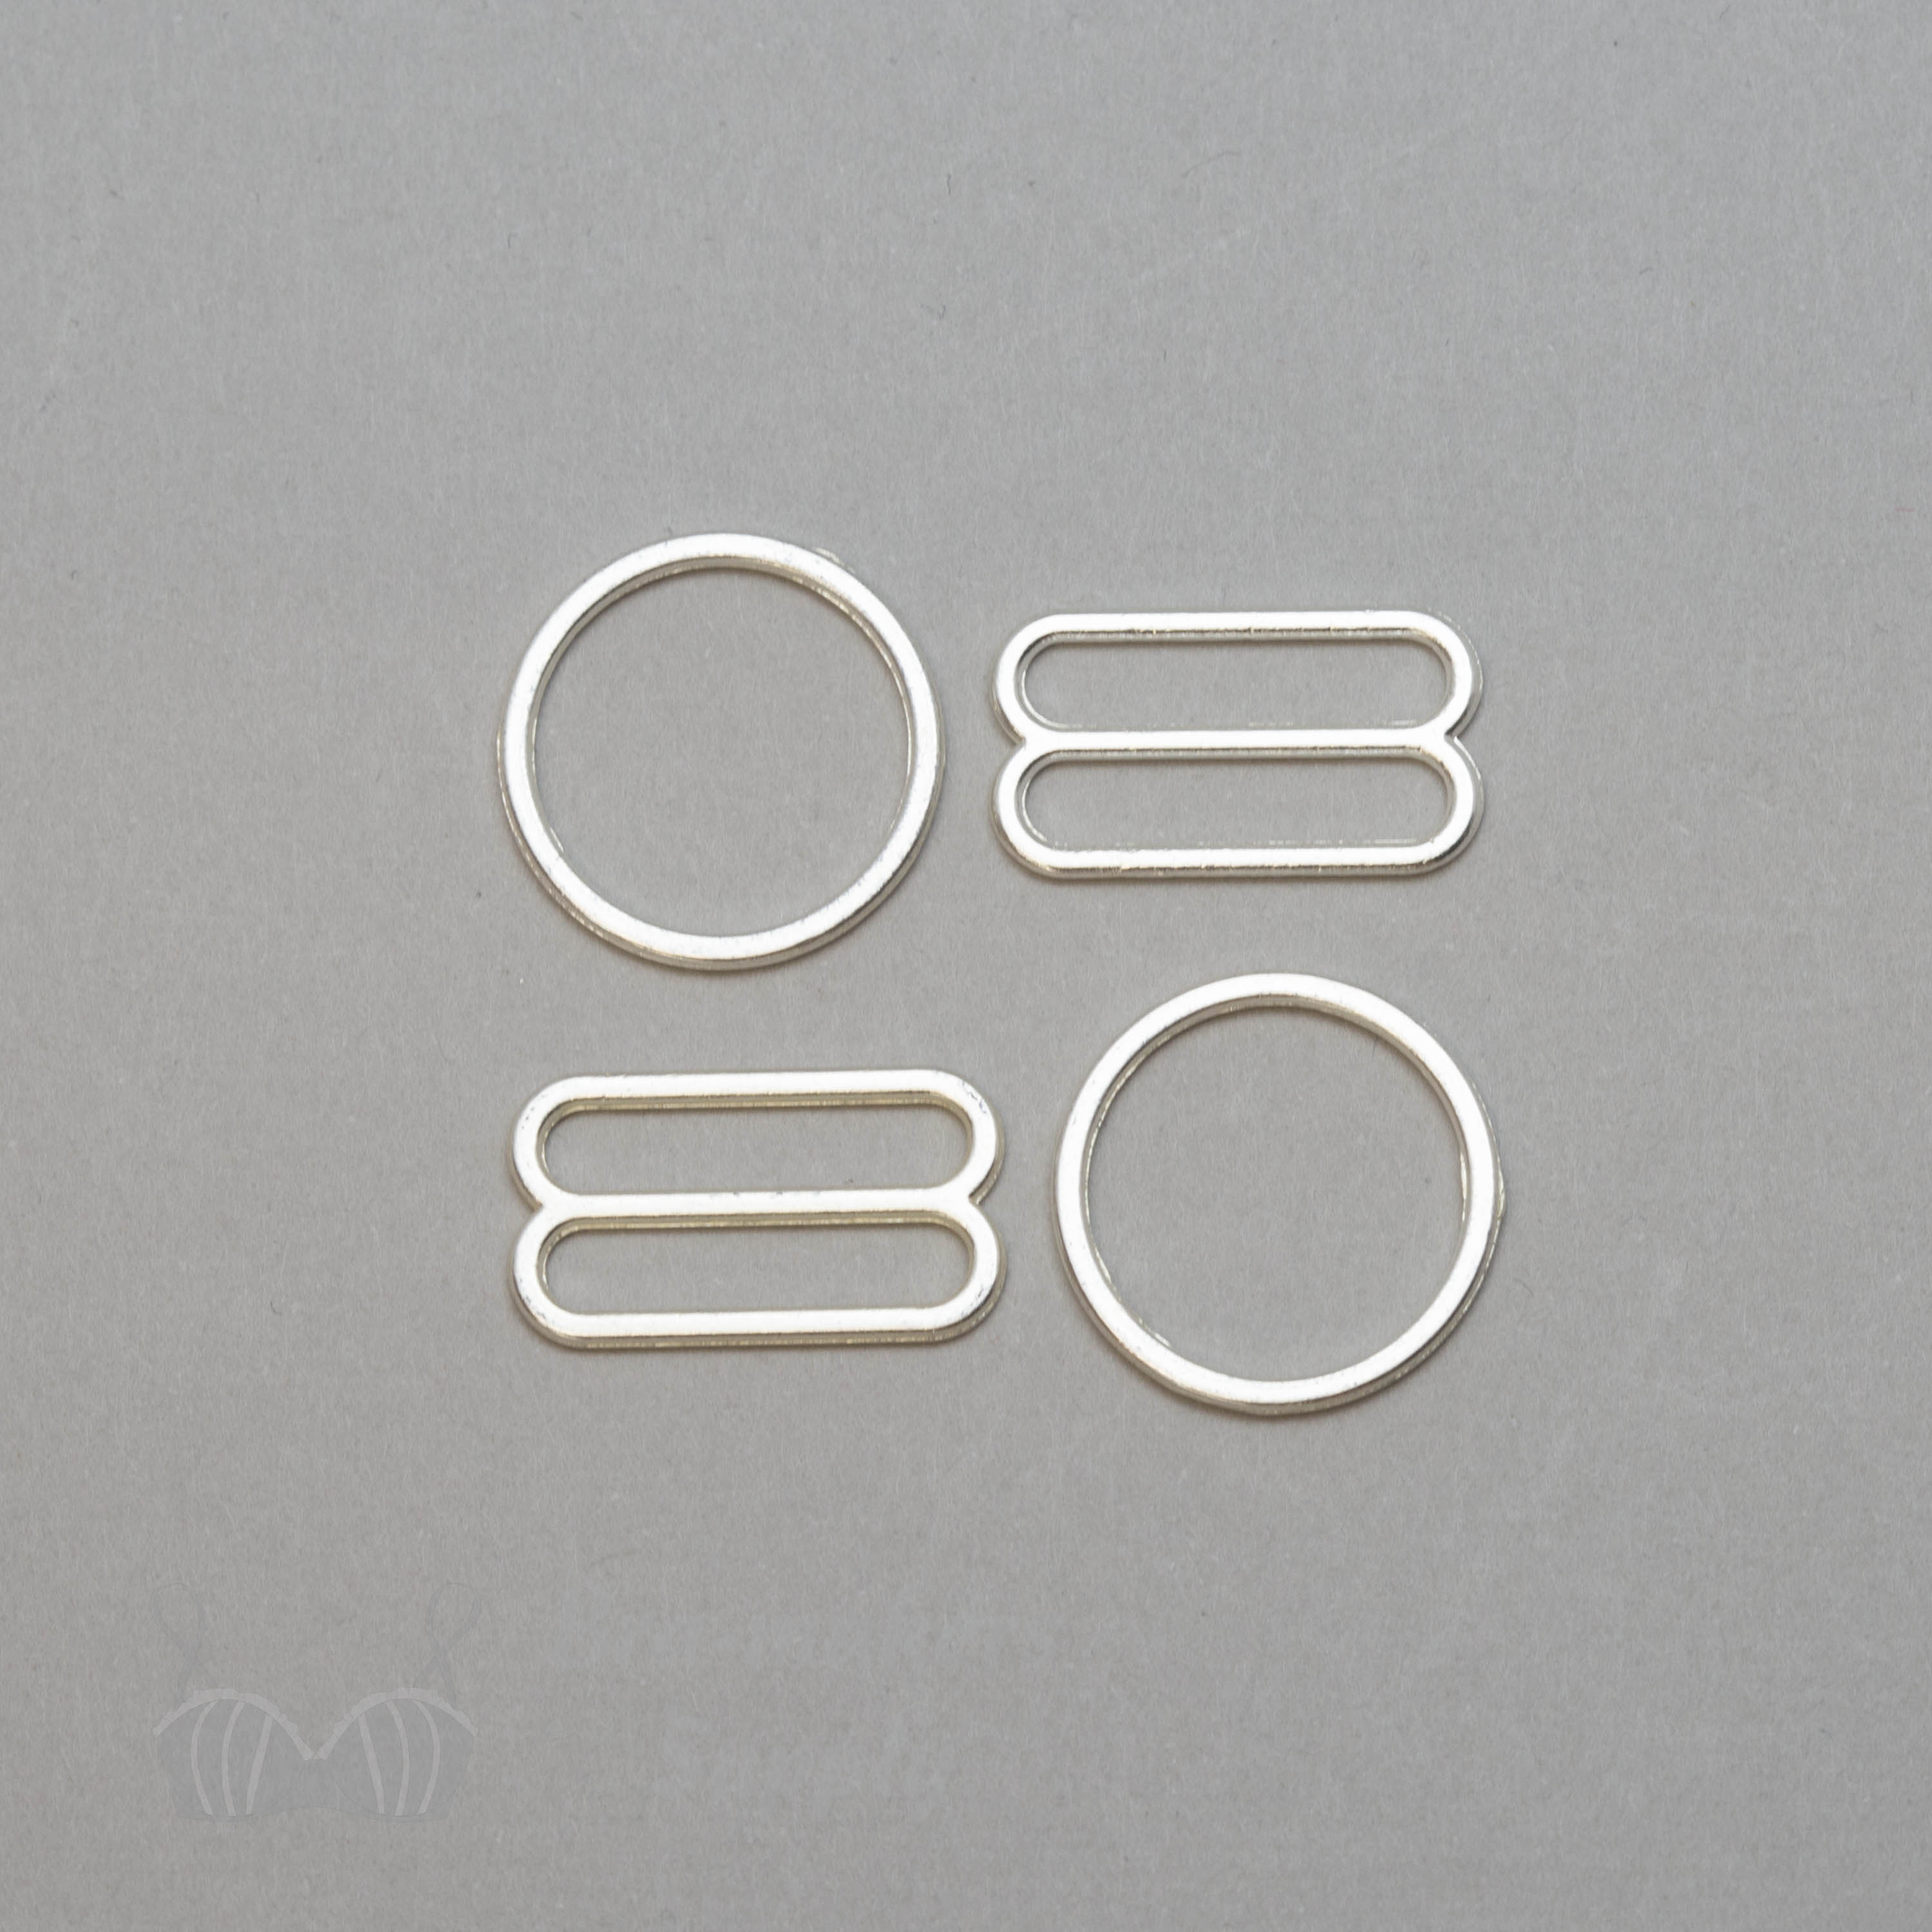 Free shipping 100 pcs/lot Silver/Gold/Rose Gold bra o-rings sliders hooks  lingerie adjuster underwear accessories - Price history & Review, AliExpress Seller - MS Garment Accessory Store